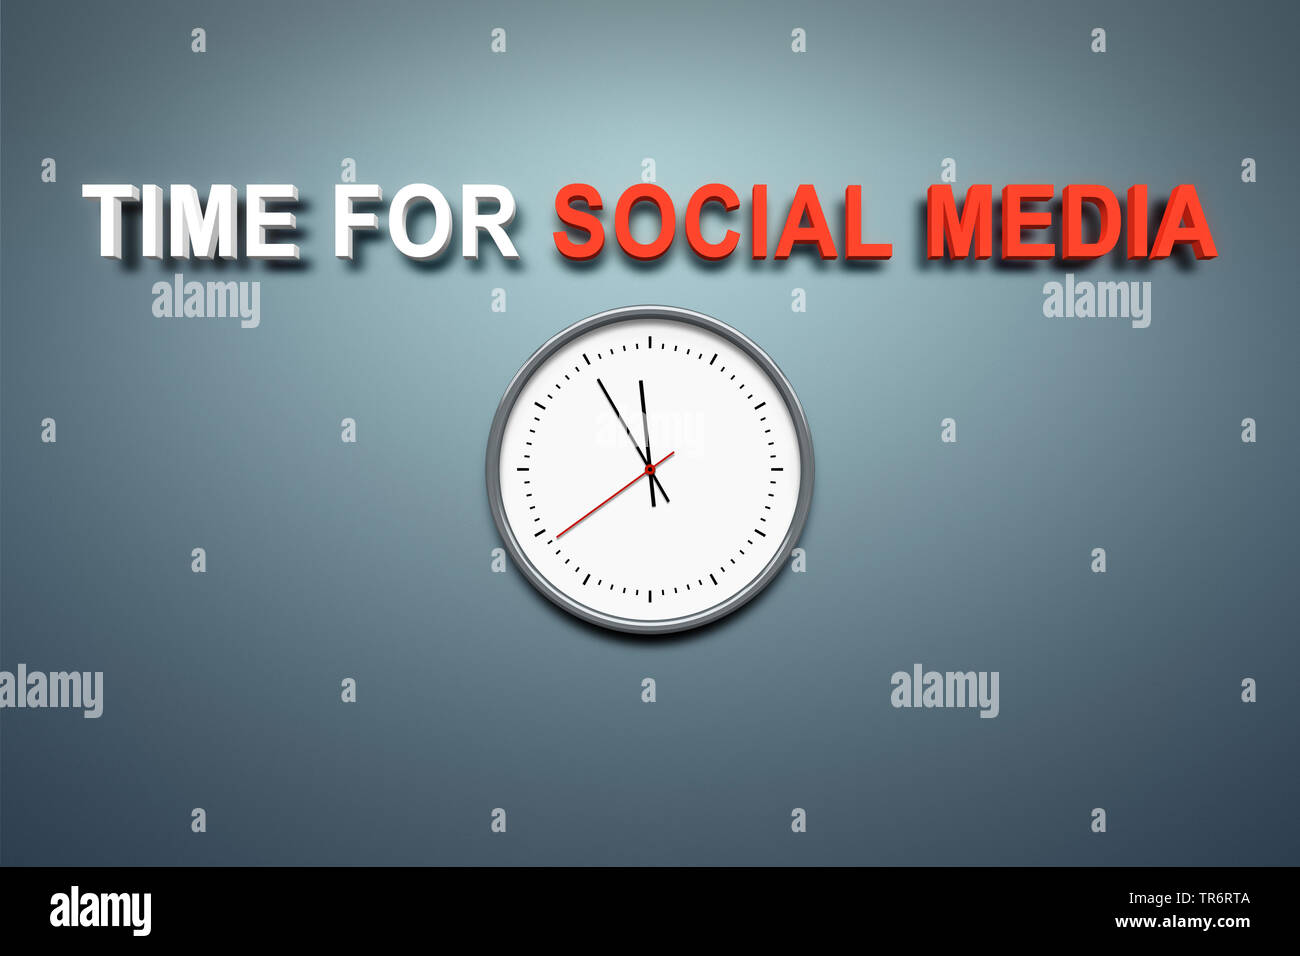 Sozial; Soziale; Medien; Facebook; Twitter; Gemeinschaft, clock with English title Time for Social Media Stock Photo